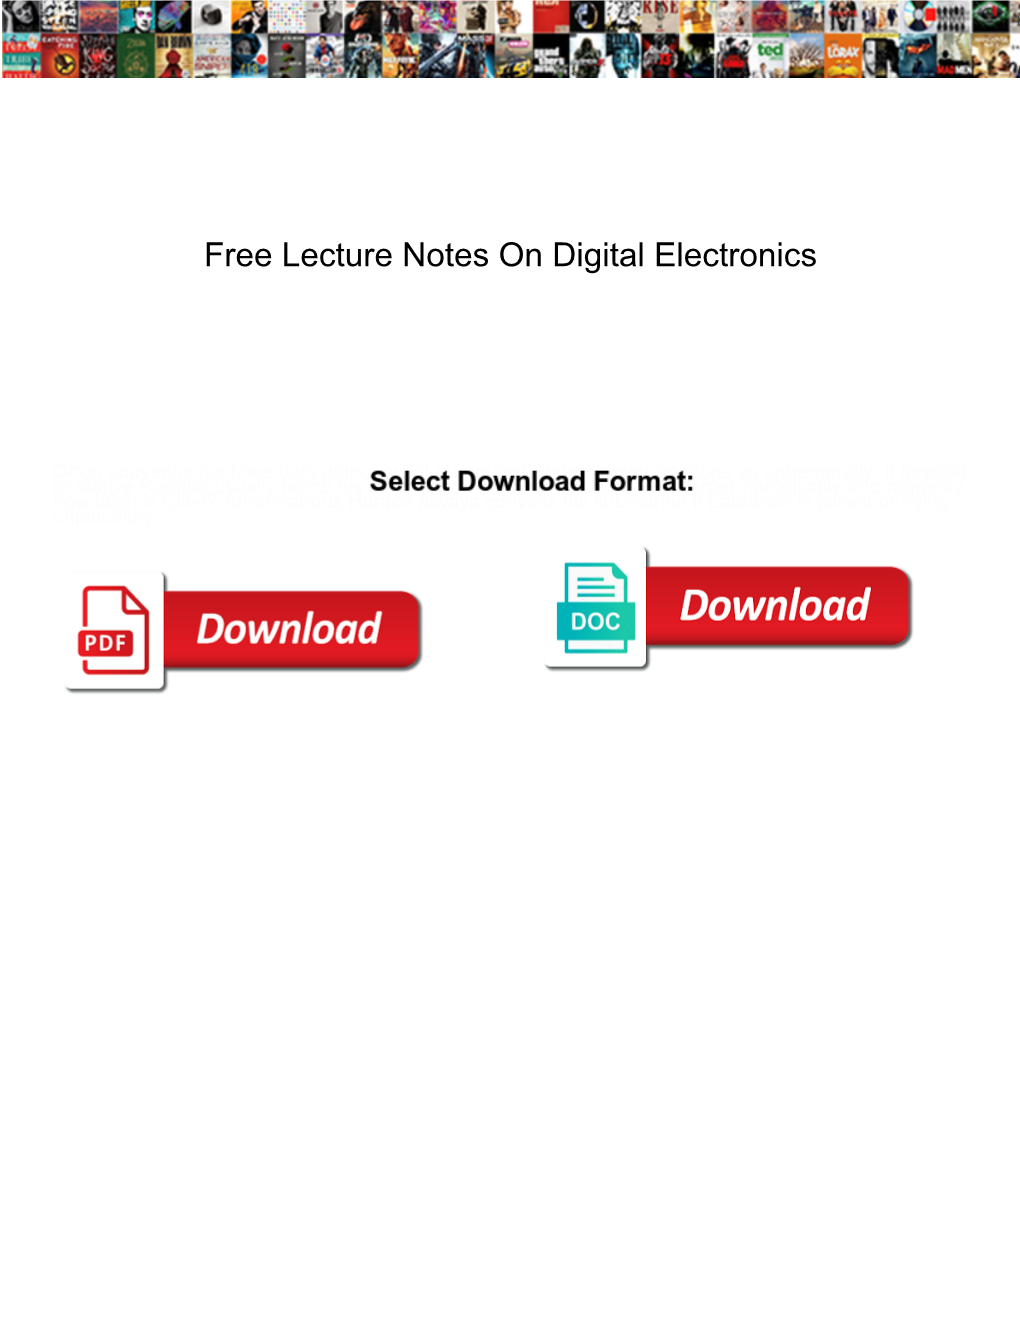 Free Lecture Notes on Digital Electronics